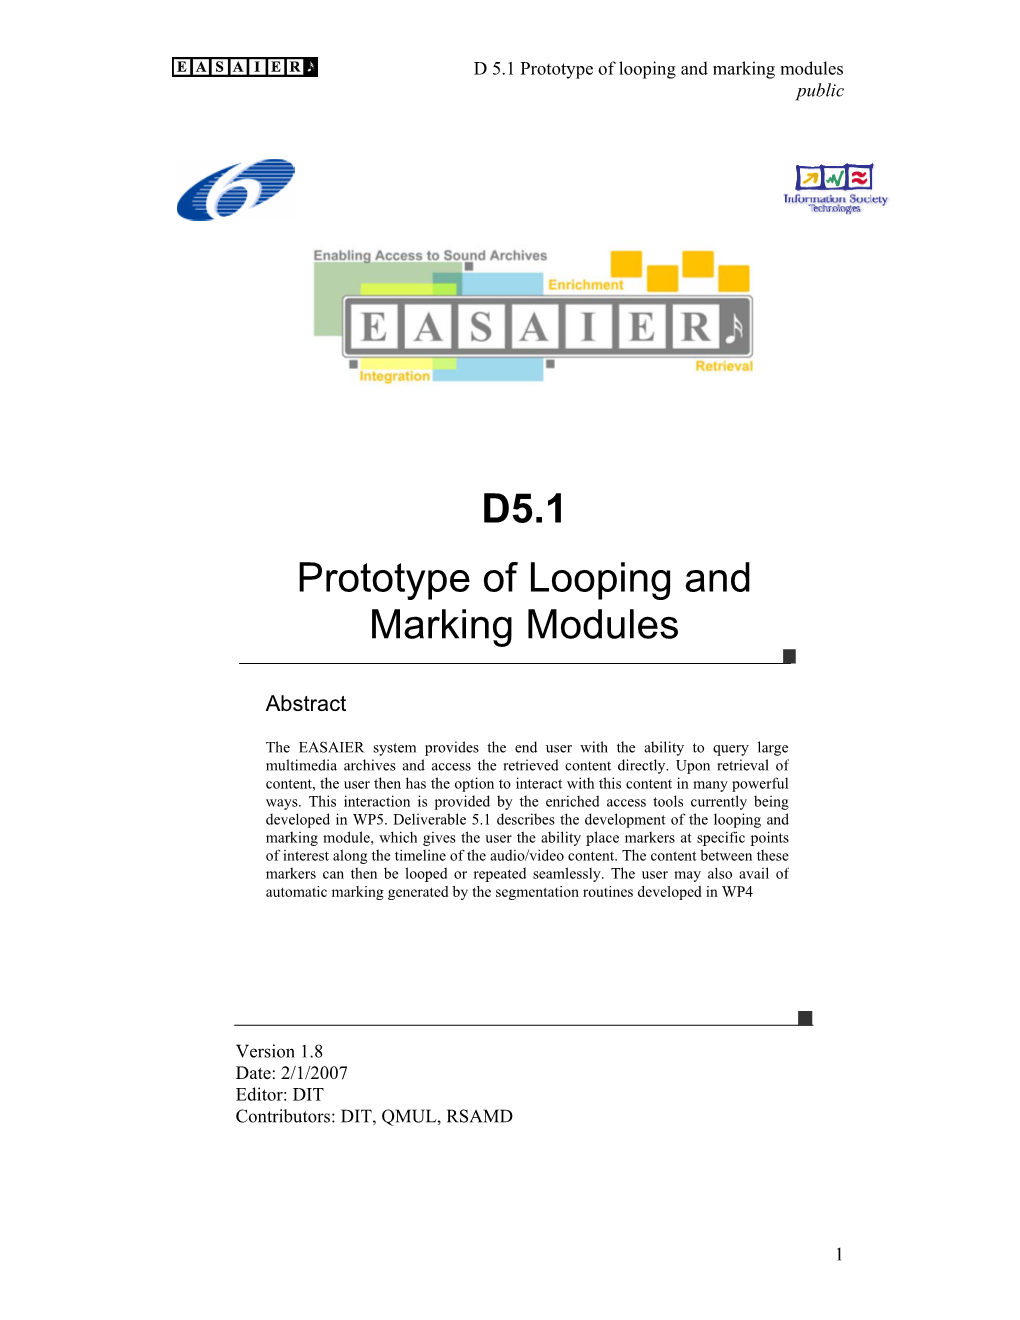 D5.1 Protoype of Looping and Marking Modules